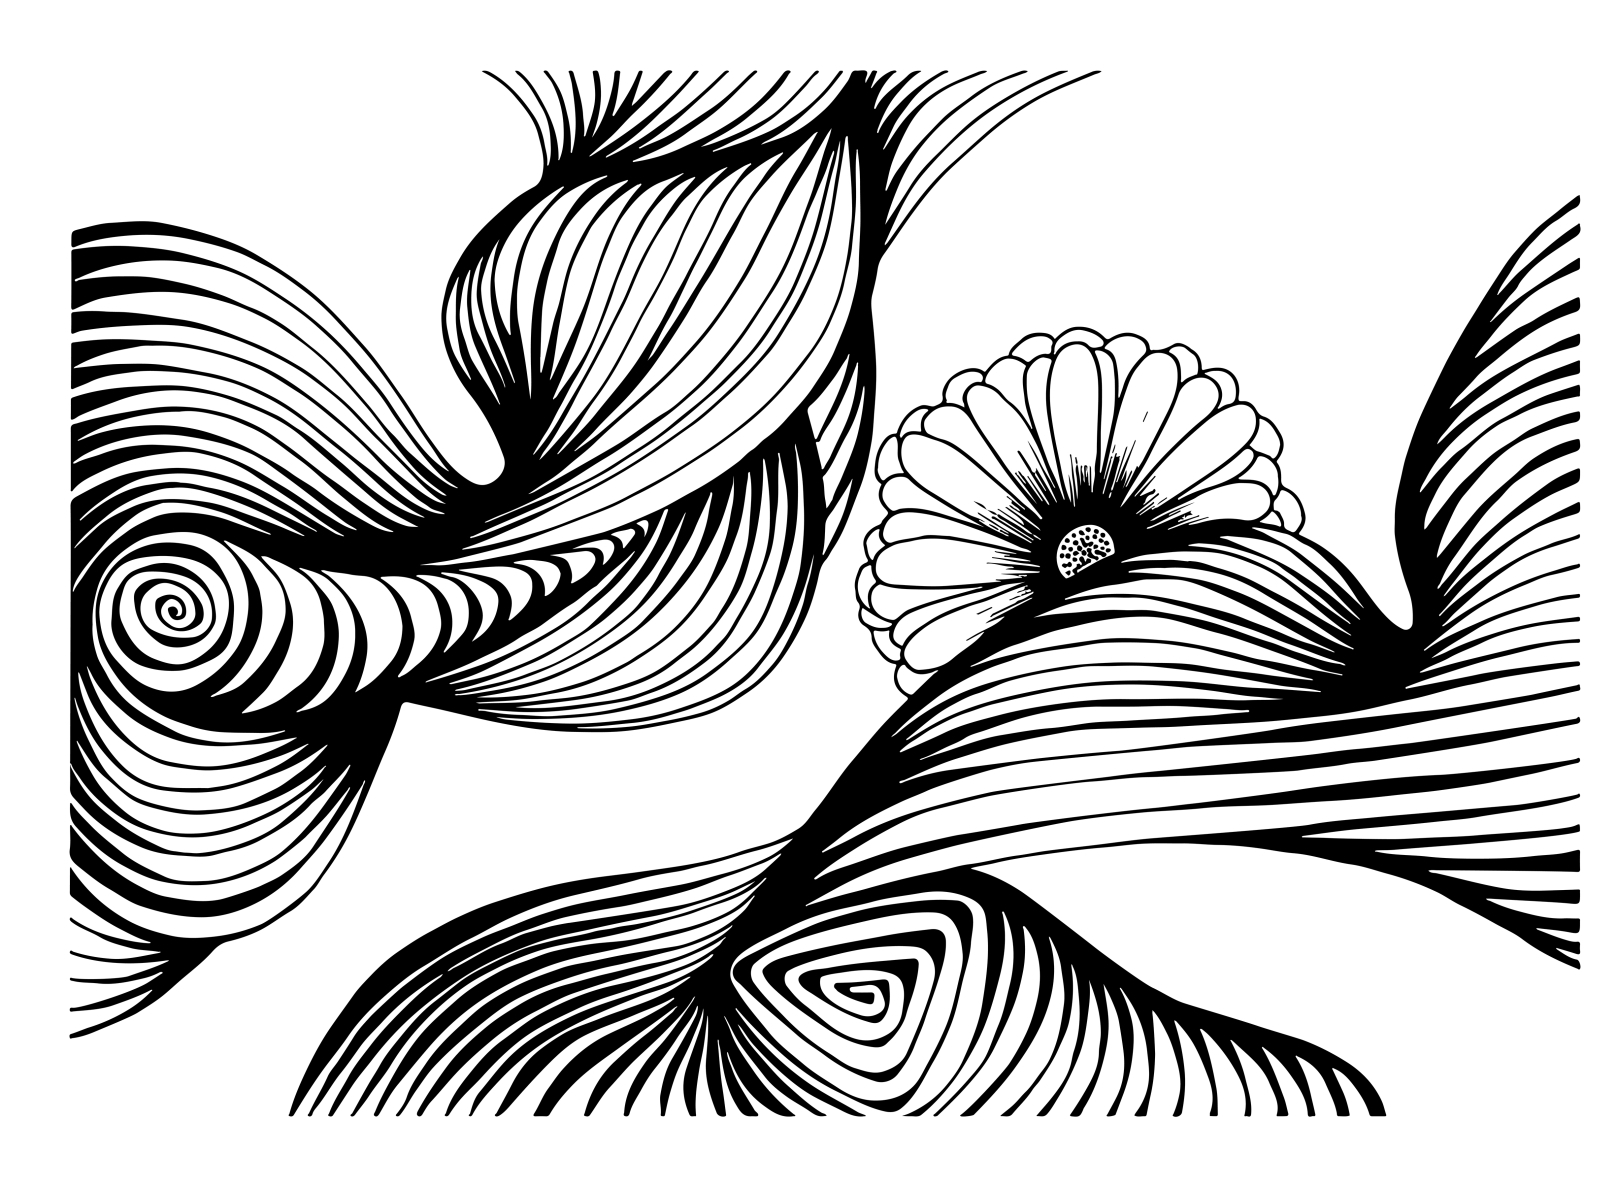 Abstract lines by Mari Bryk on Dribbble